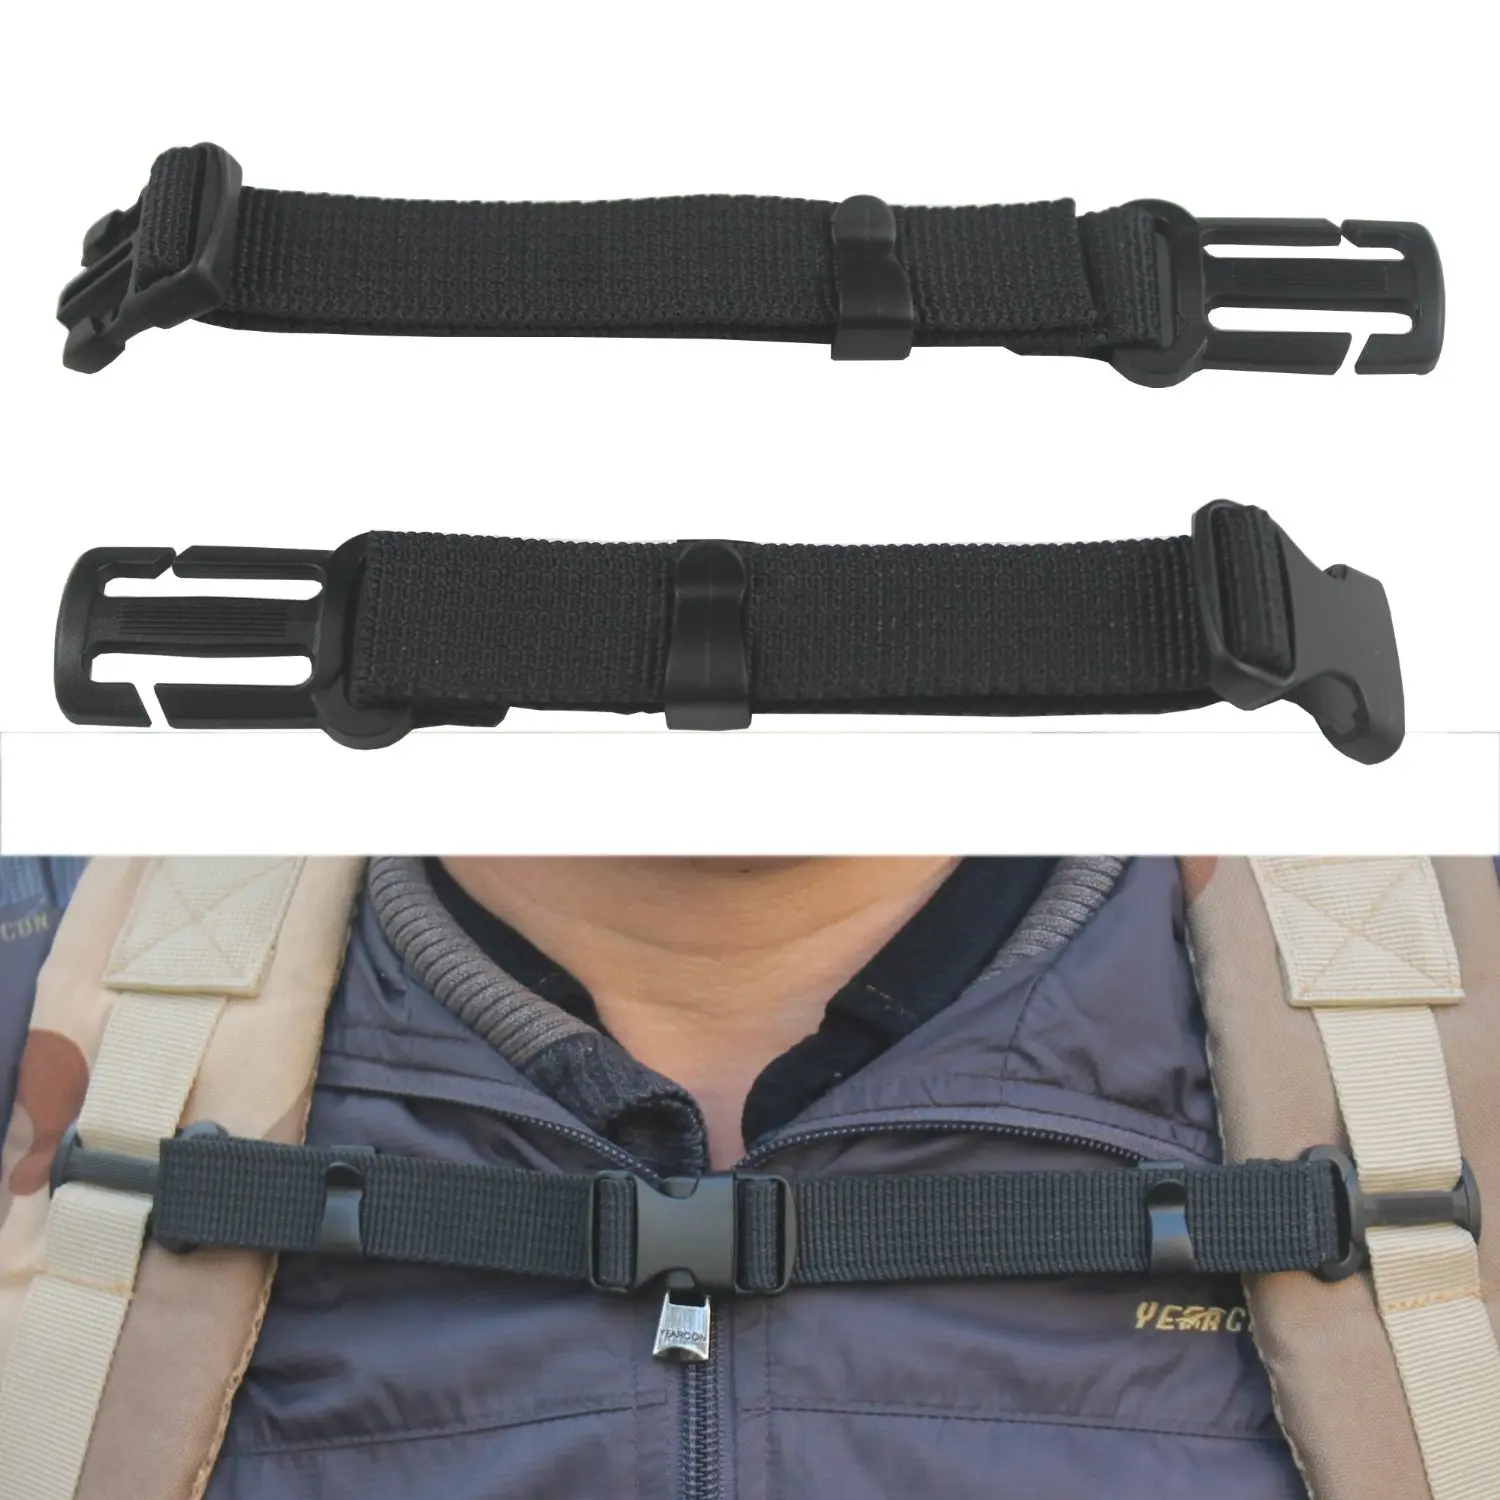 US Made for 3/4" webbing Nylon Chest sternum harness strap backpack camera bag